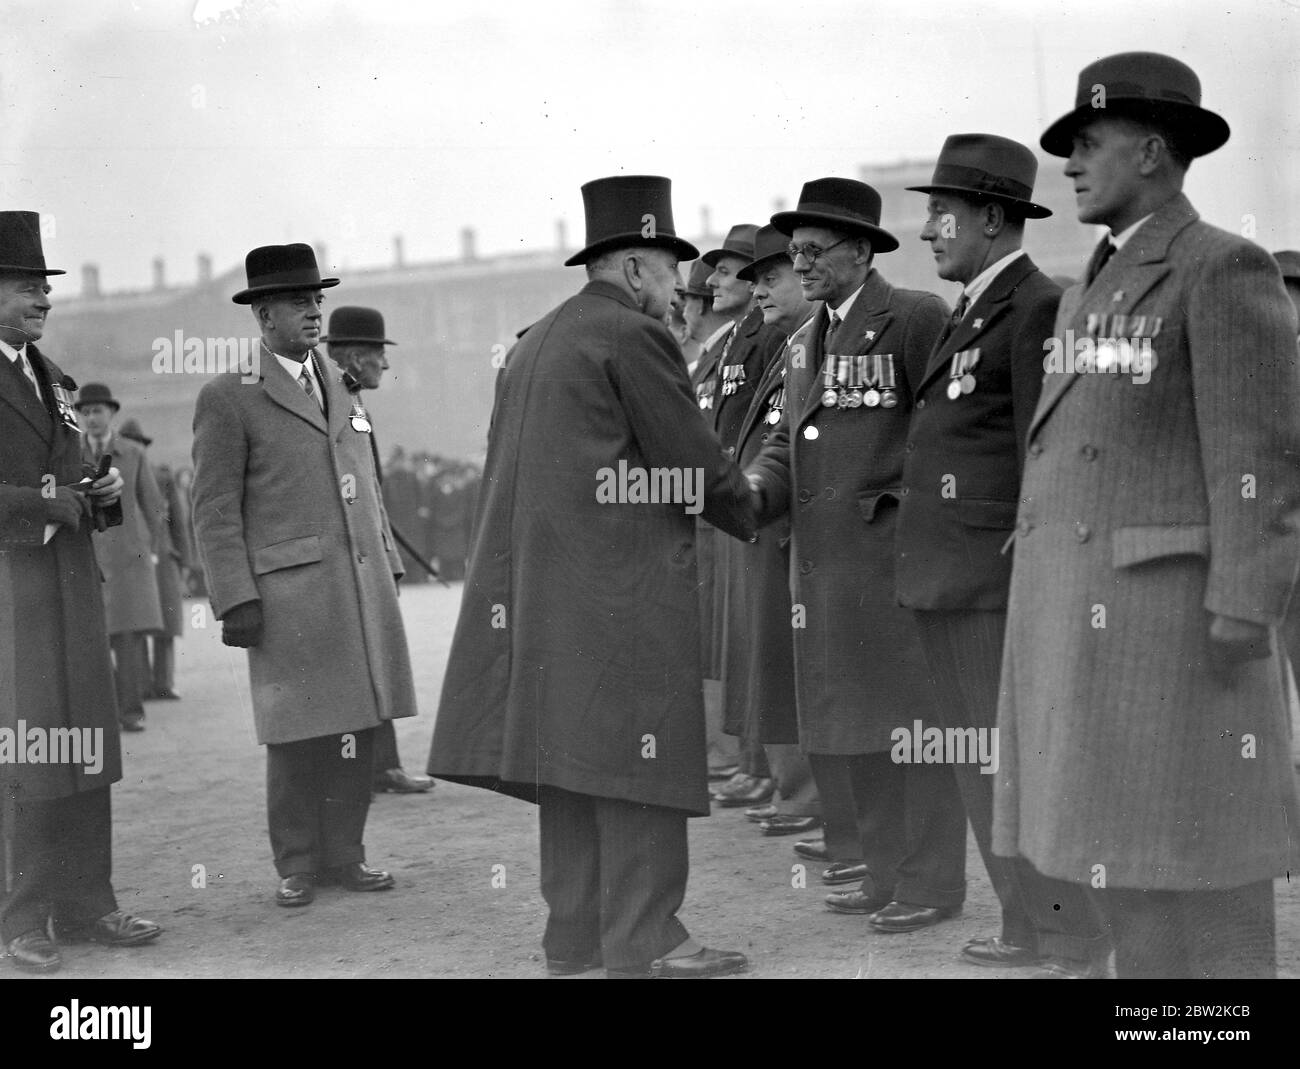 Royal Naval Old Comrades Association Annual Parade, Horse Guards, London. Admiral Tupper chatting to F. Robinson, Coxswain of destroyer Milne, Dover Patrol. 13th November 1937 Stock Photo